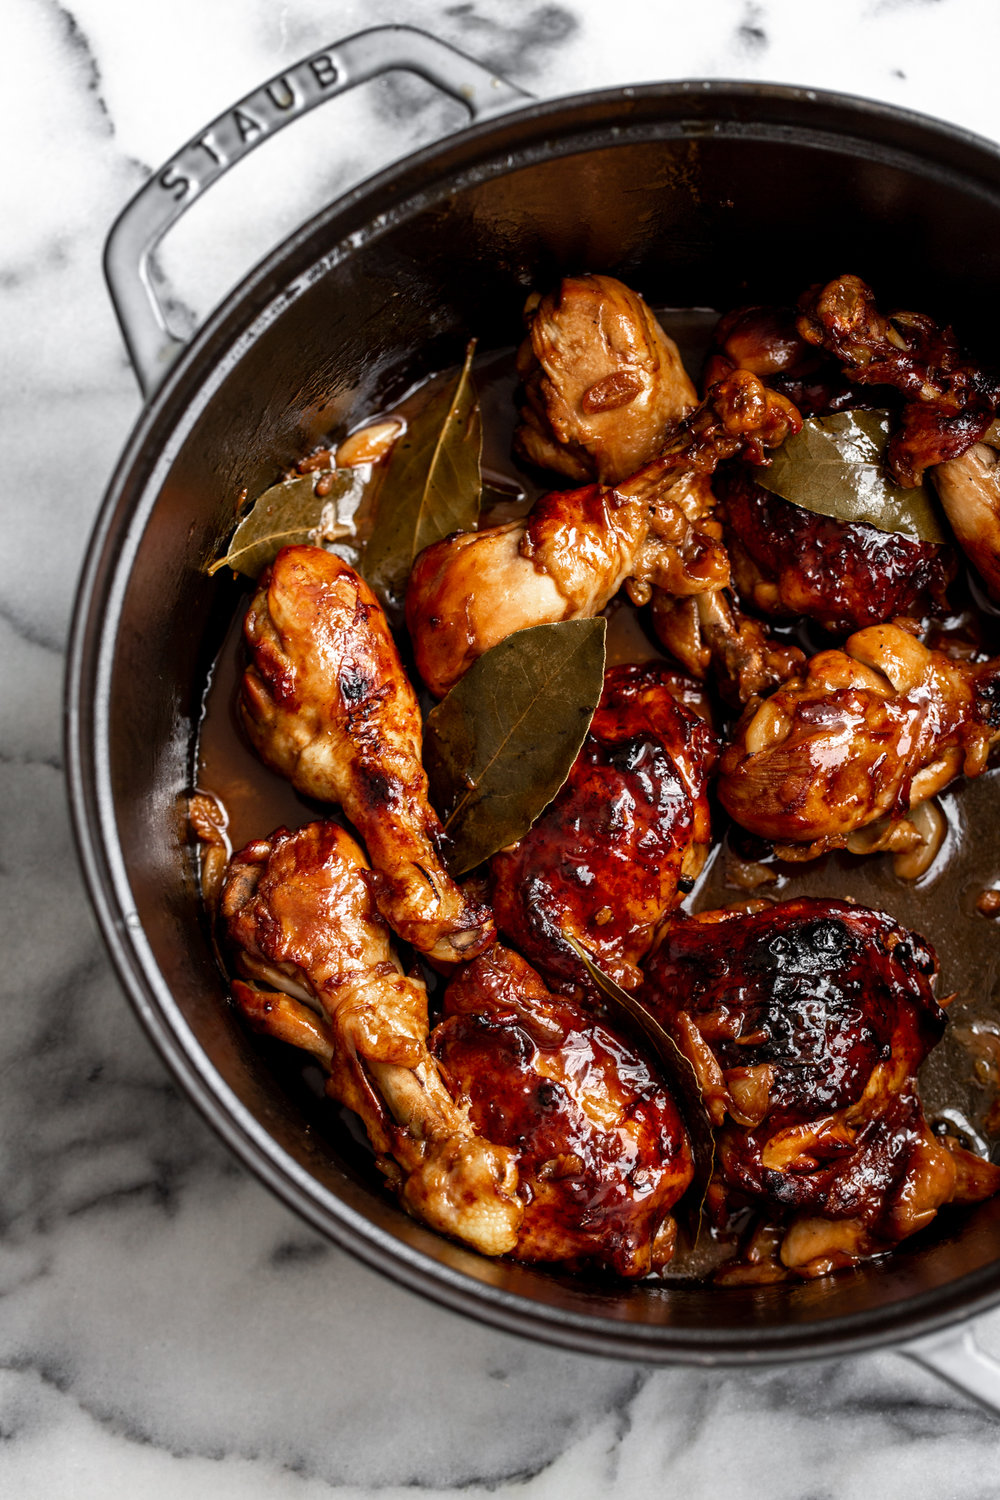 Filipino chicken adobo Chicken legs and thighs in tangy soy sauce vinegar and garlic sauce with bay leaves